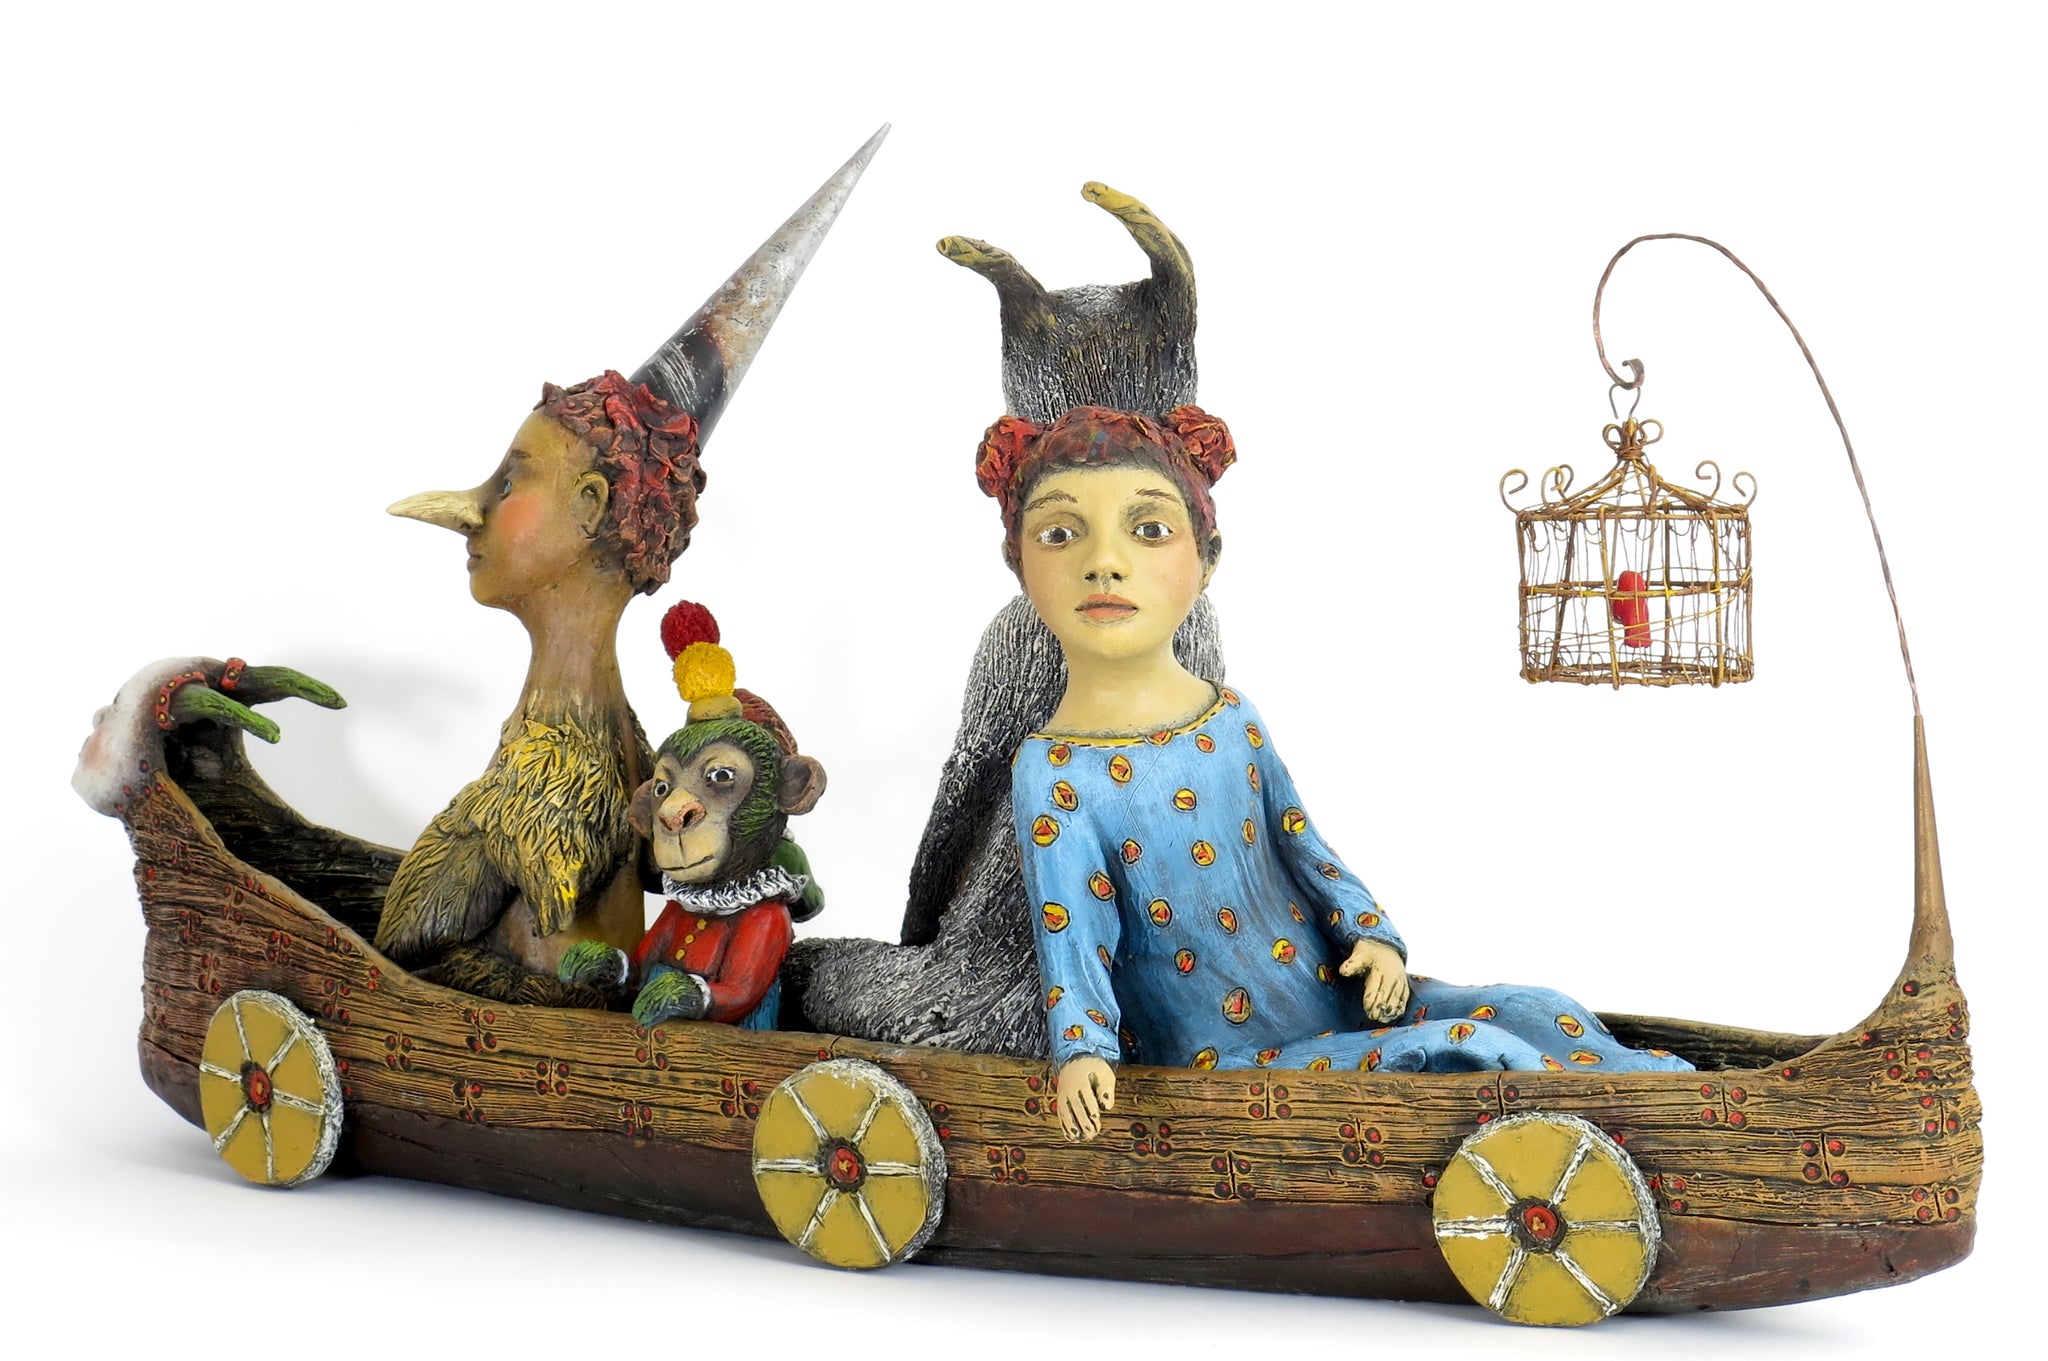 SOLD "Setting Sail with My Inner Menagerie" Original ceramic sculpture by Jacquline Hurlbert